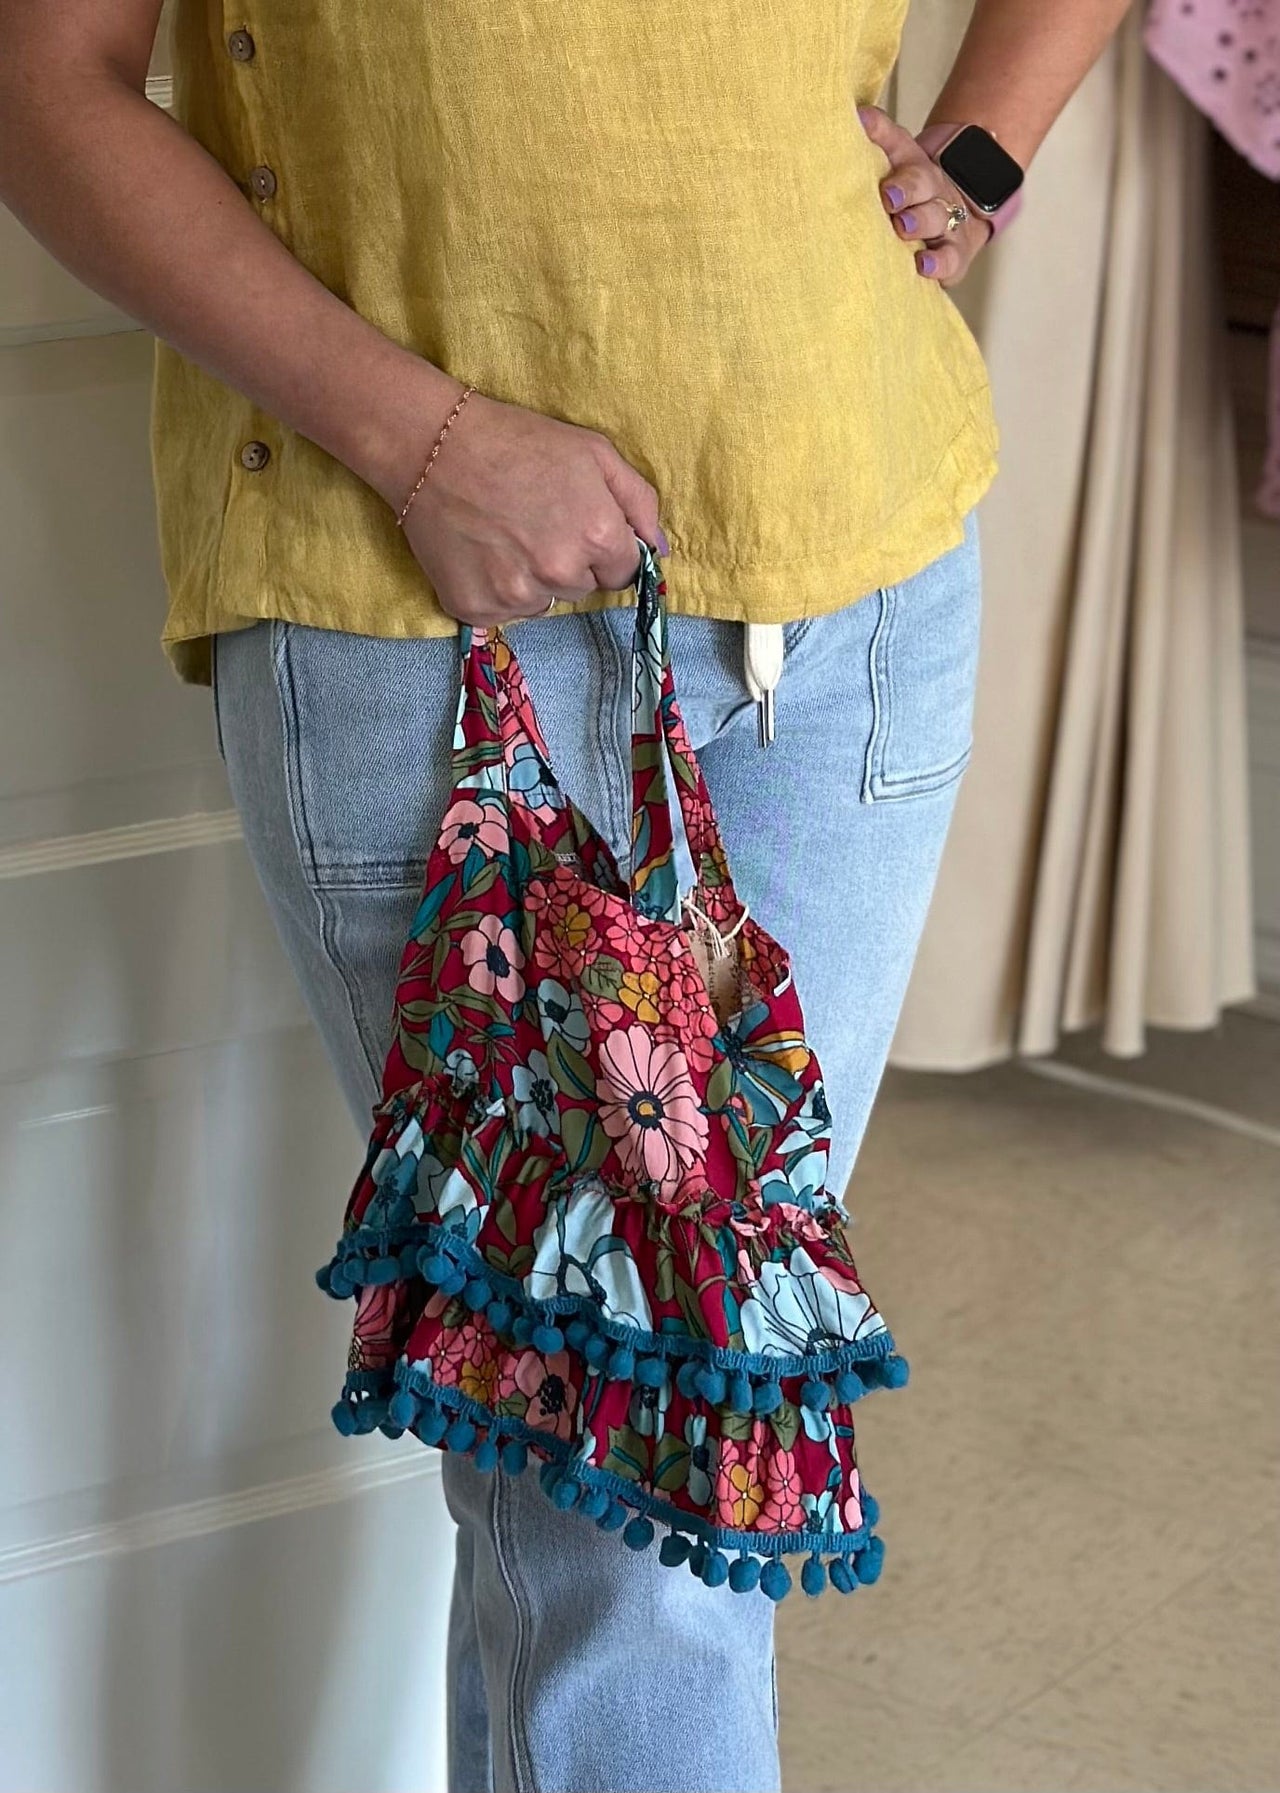 Mini Ruffle Tote - Red Floral Natural Life Accessories